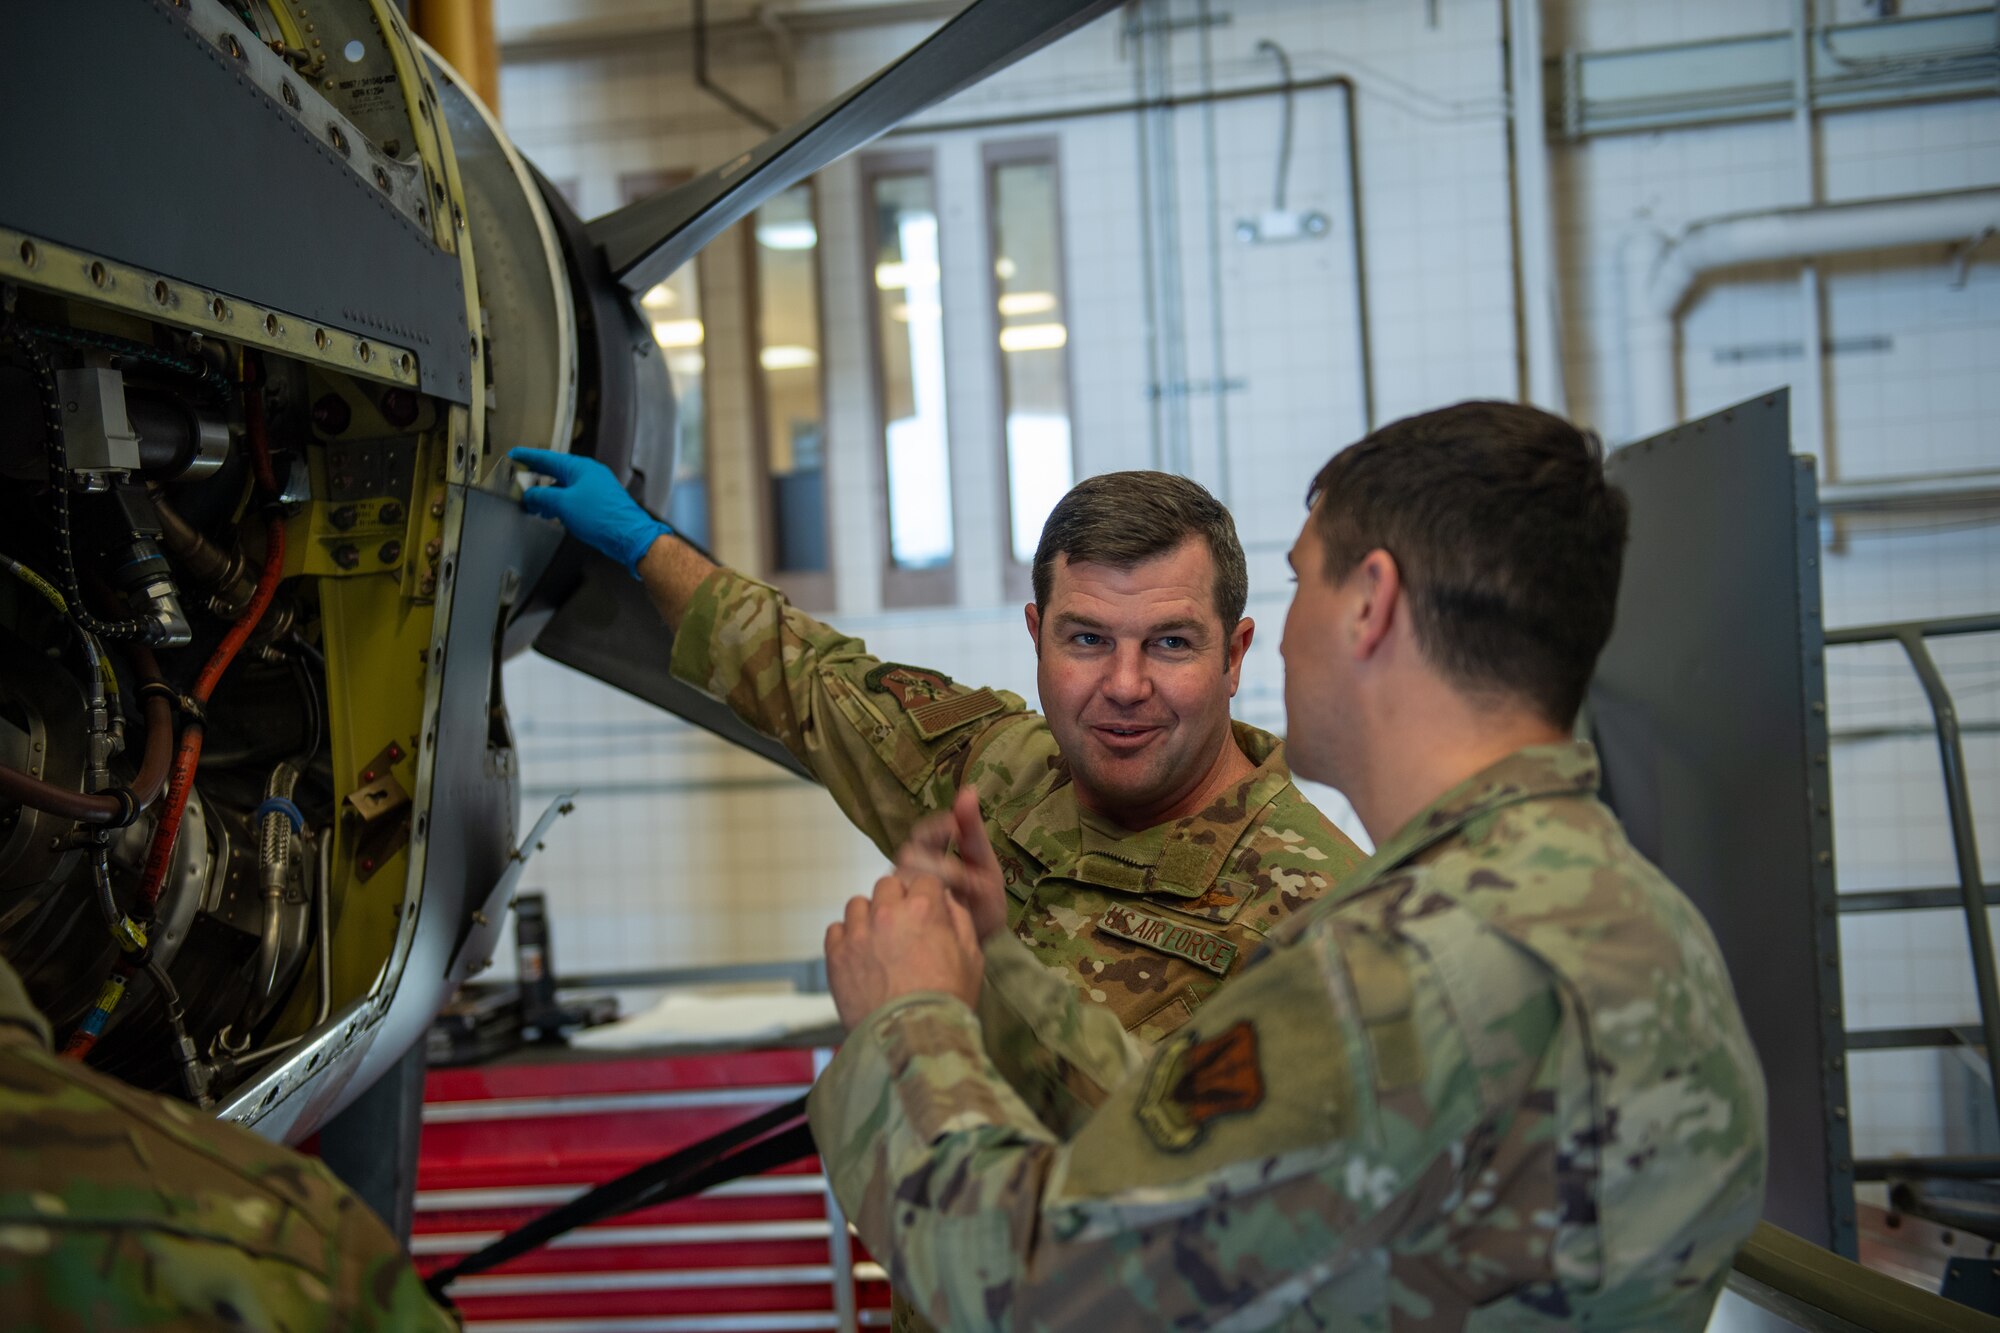 U.S. Air Force Col. Paul Sheets, 23rd Wing commander, works on the fourth engine of an HC-130J Combat King II at Moody Air Force Base, Georgia, March 25, 2024. During his time with the 71st RGS, Sheets conducted a borescope inspection on the engine as well as a combustion liner and turbine assembly. (U.S. Air Force photo by Airman Cade Ellis)